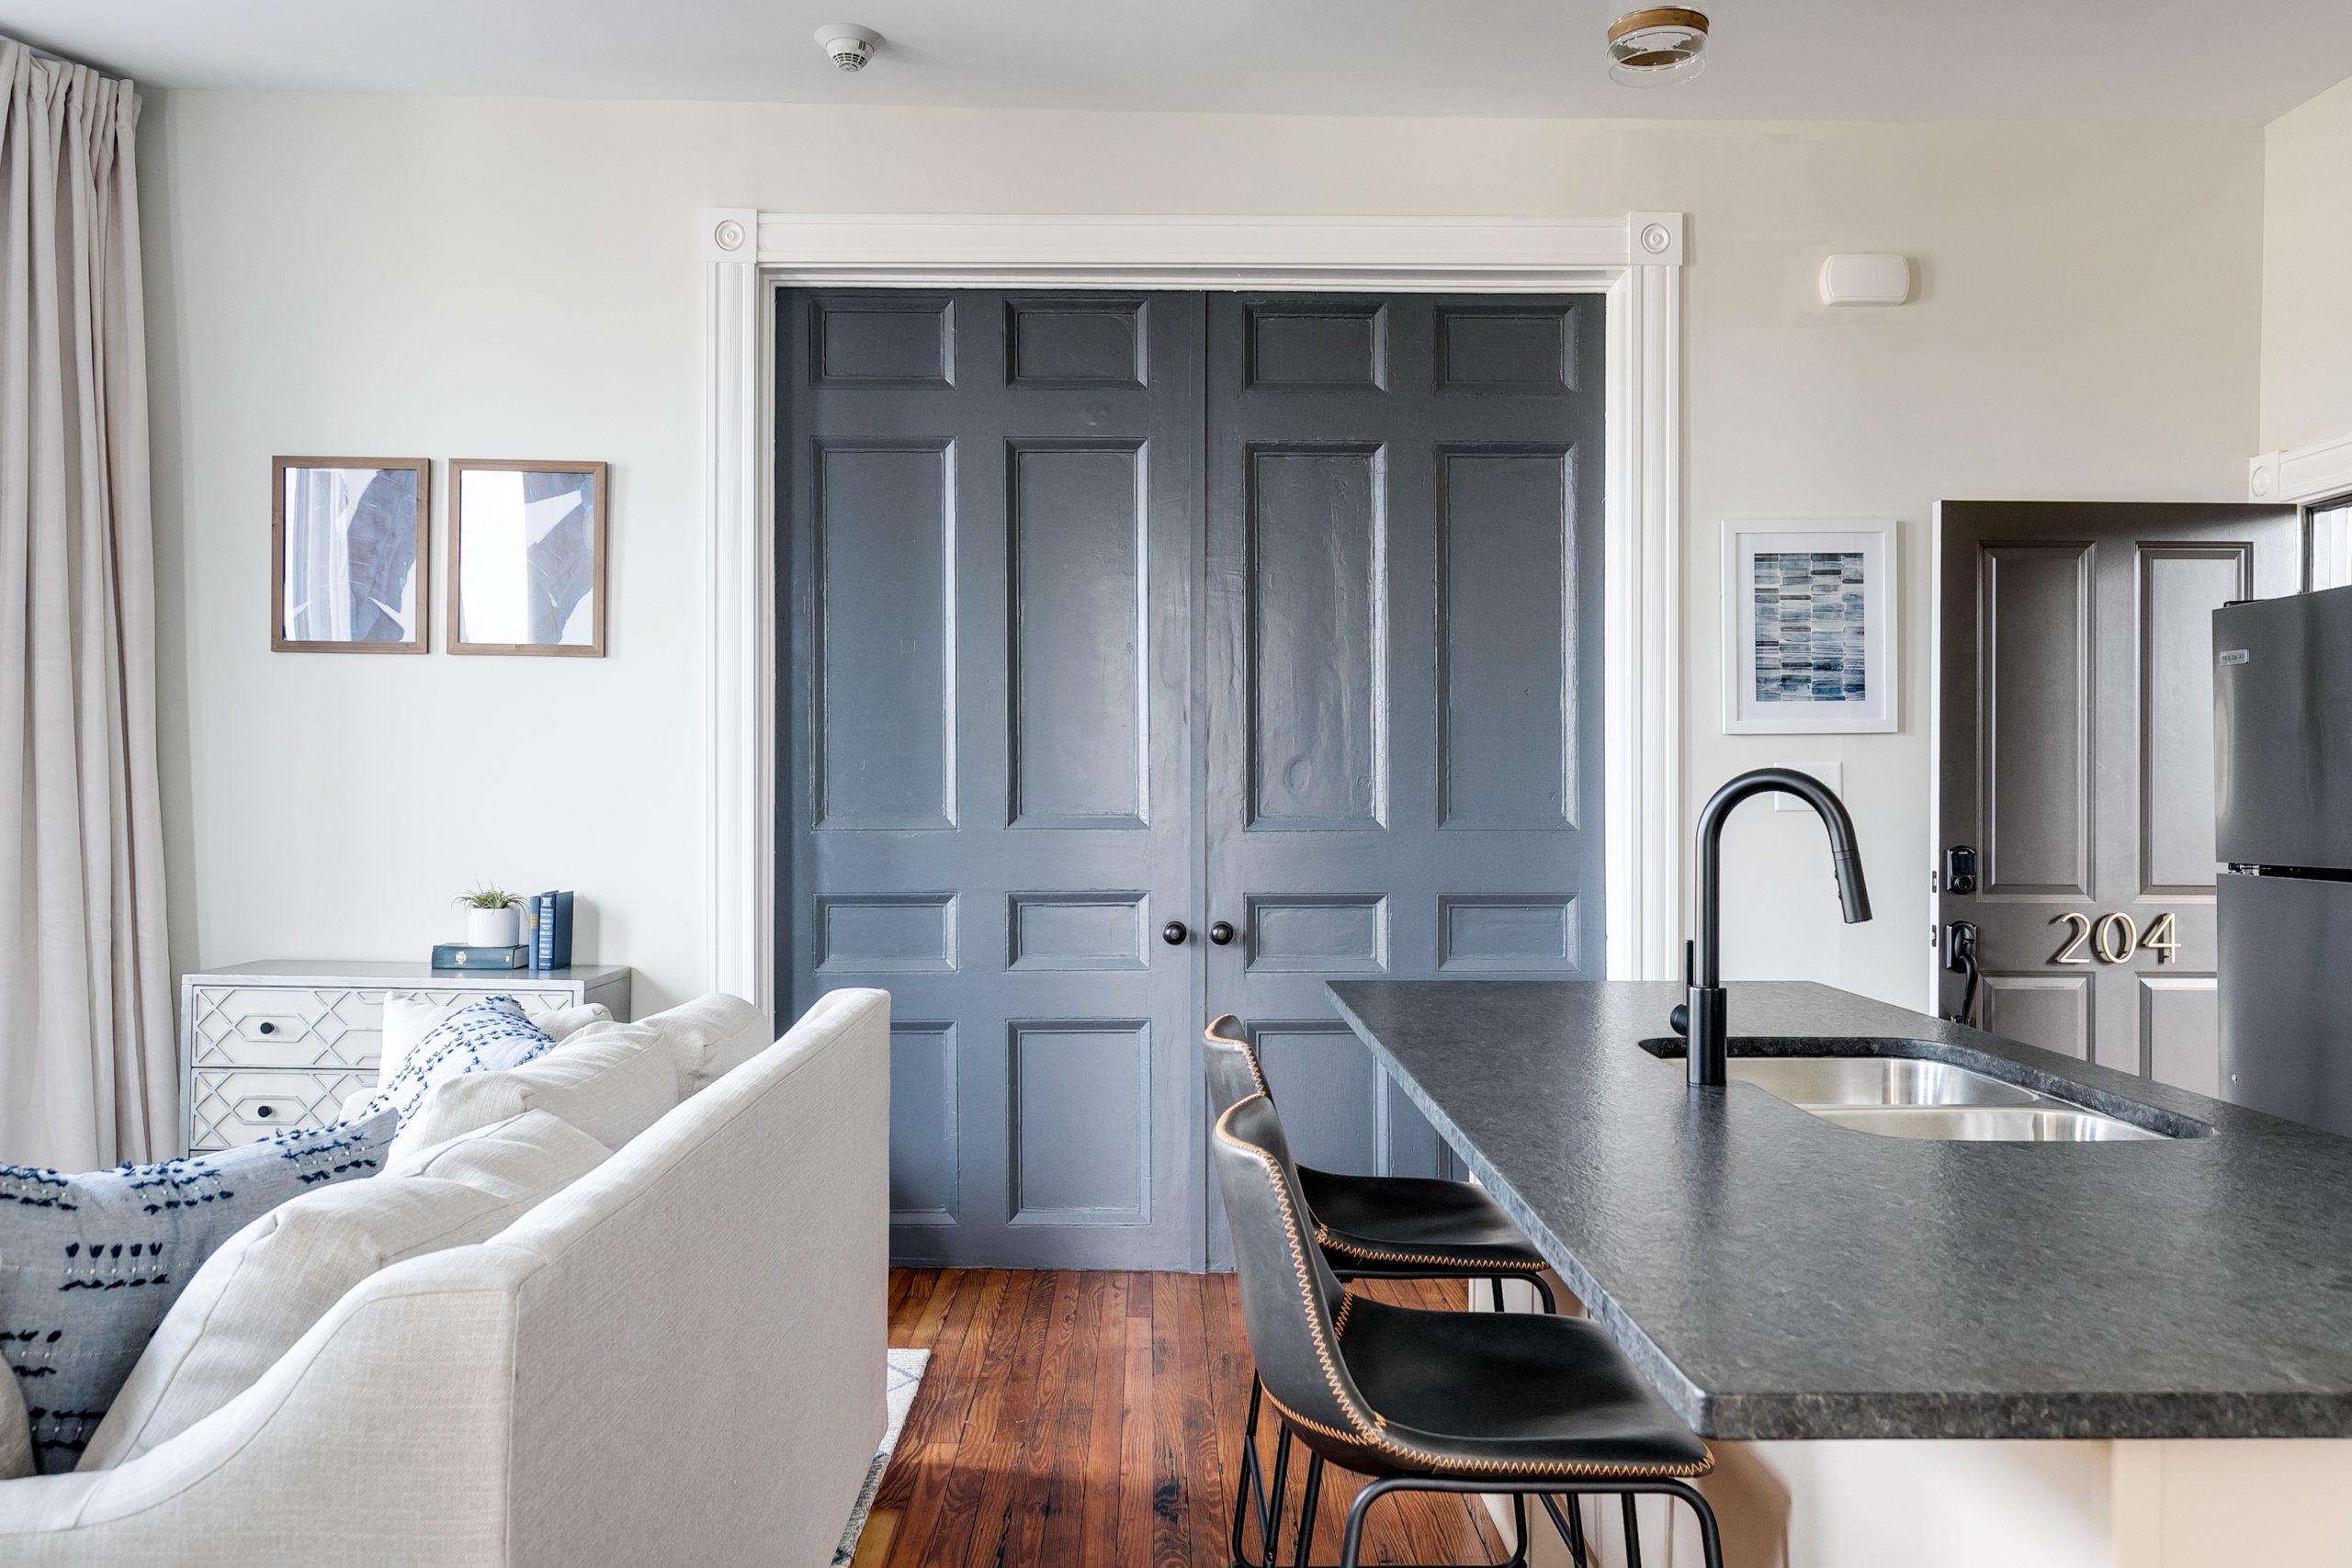 Massive blue/gray French doors that give a modern yet classic feel to the living space.